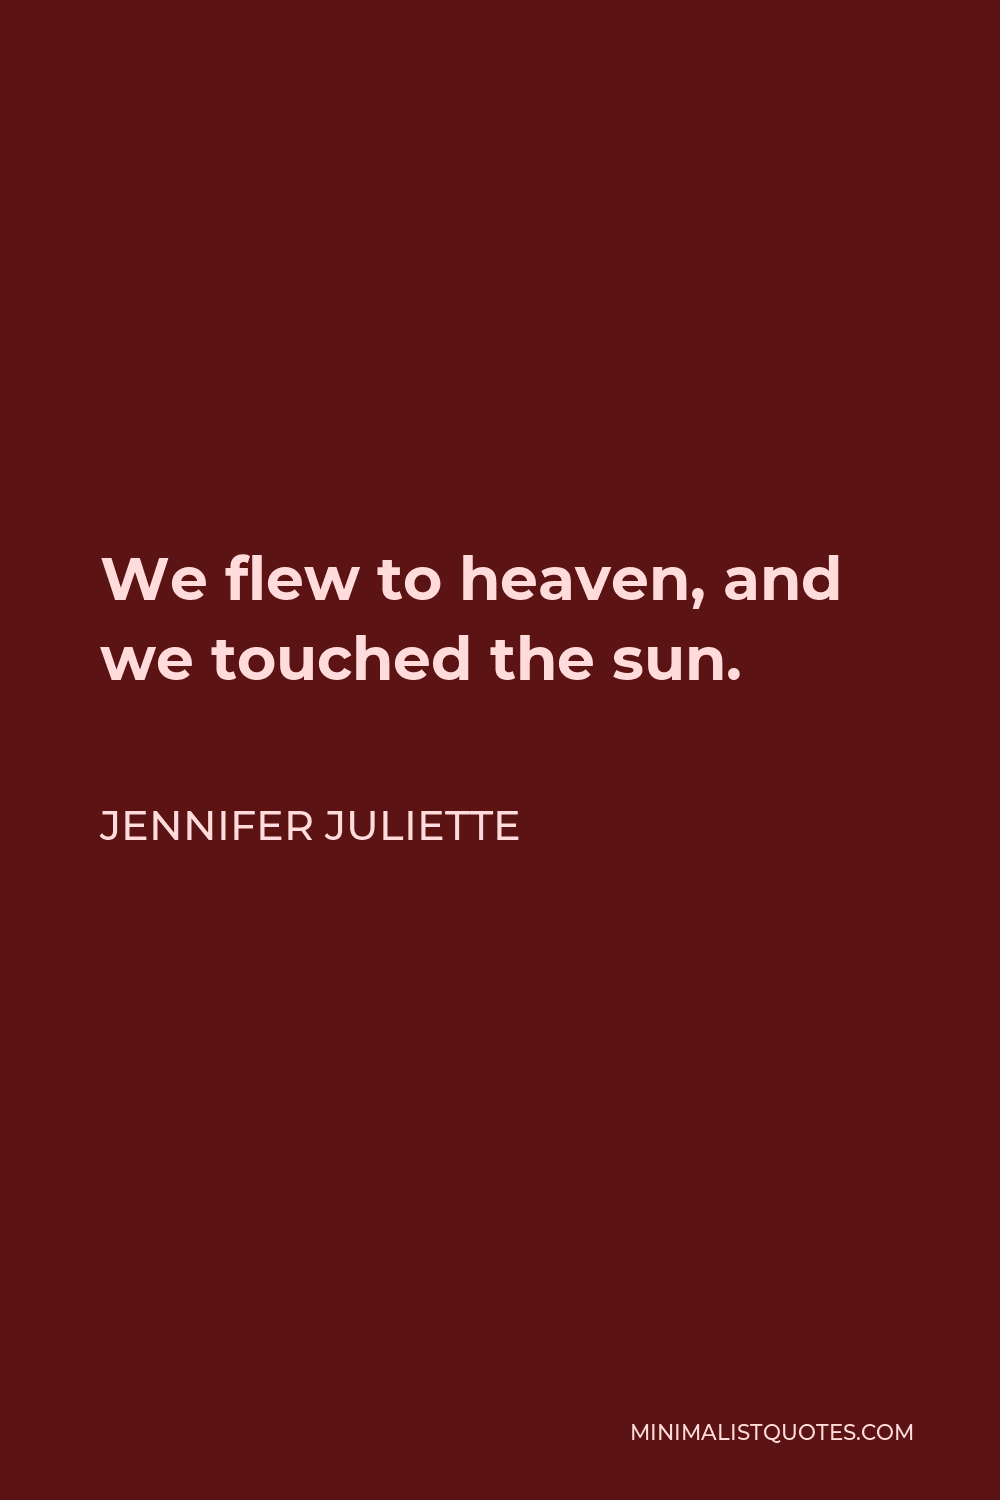 Jennifer Juliette Quote - We flew to heaven, and we touched the sun.